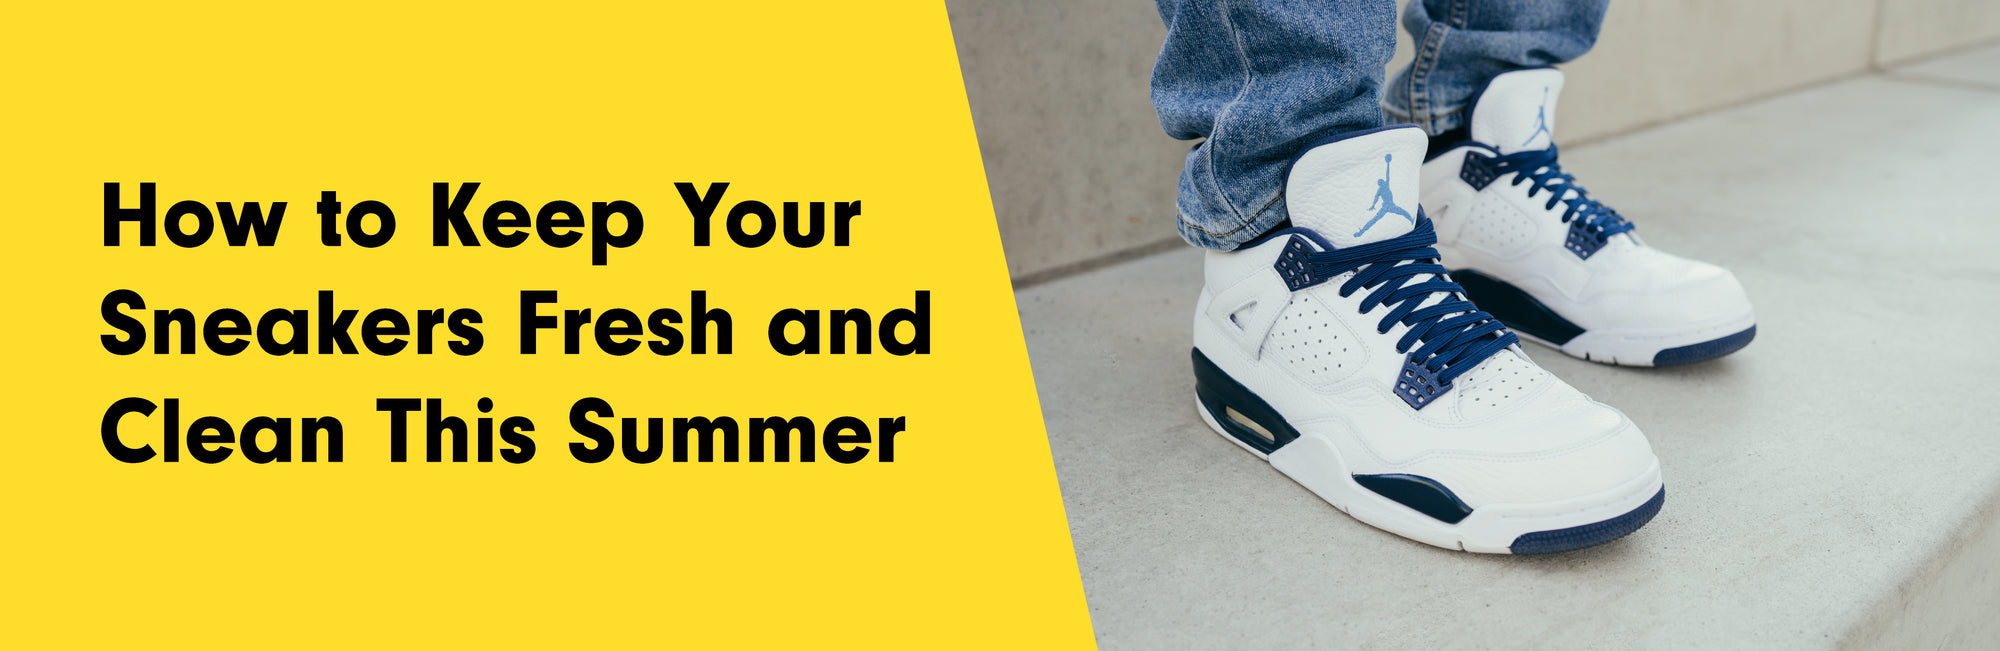 How to Keep Your Sneakers Fresh and Clean This Summer